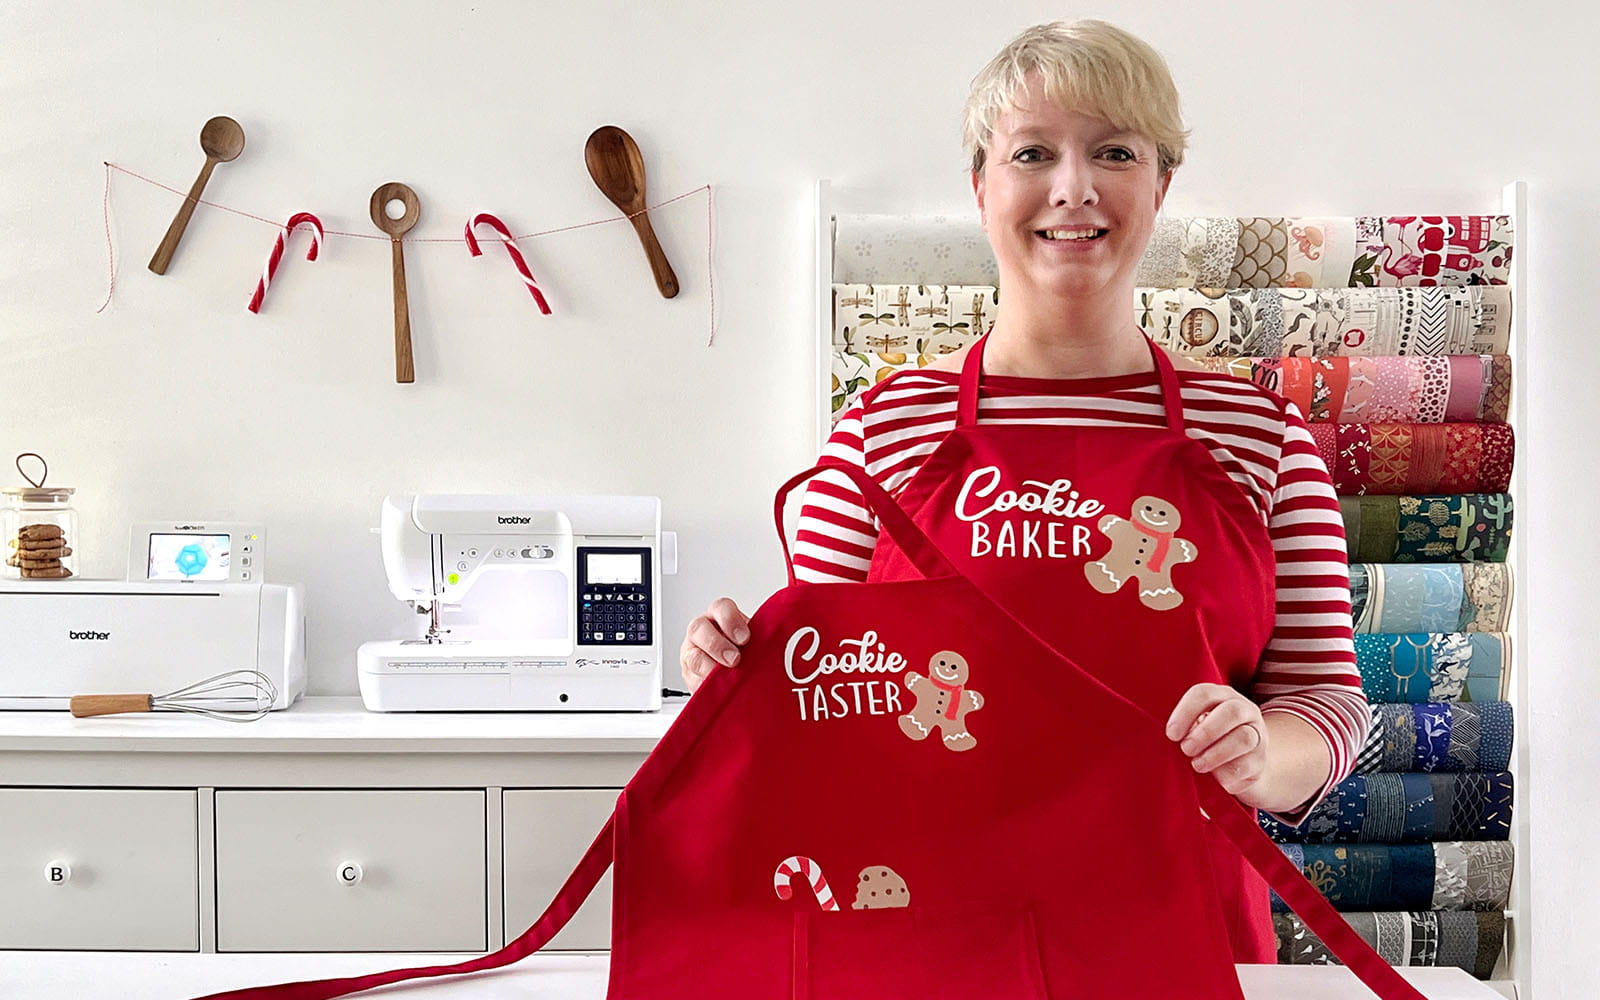 Ioana standing in her studio with 2 red aprons